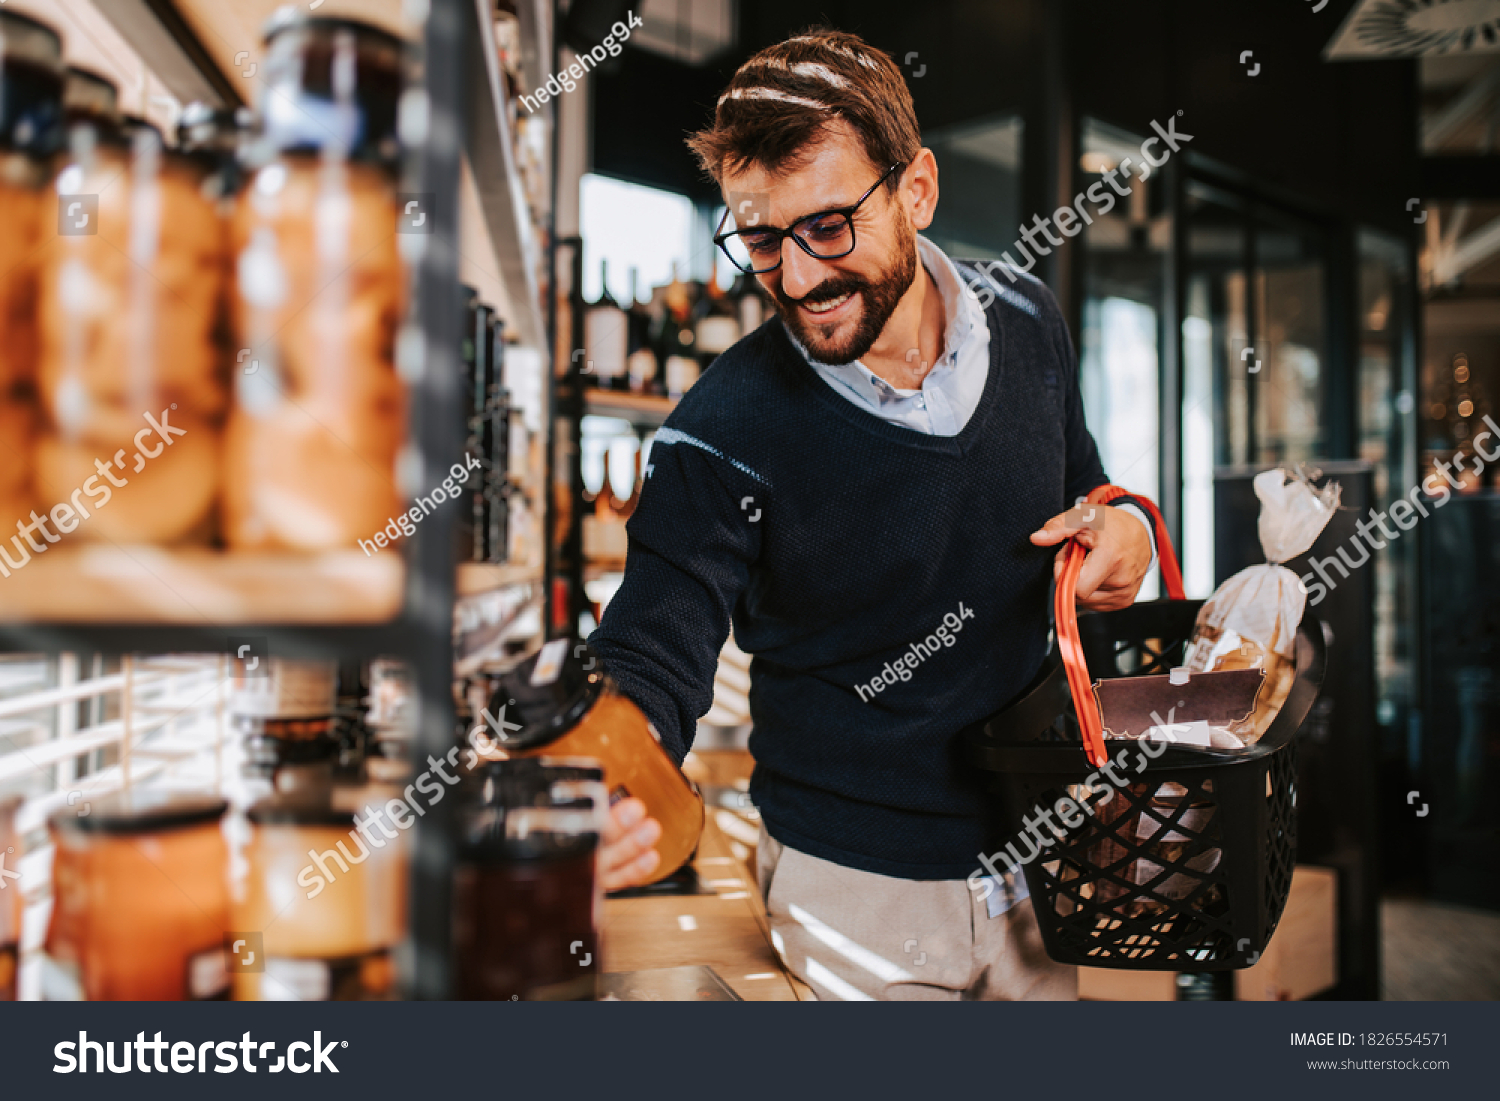 Handsome middle age man buying some healthy food and drink in modern supermarket or grocery store. Lifestyle and consumerism concept. #1826554571